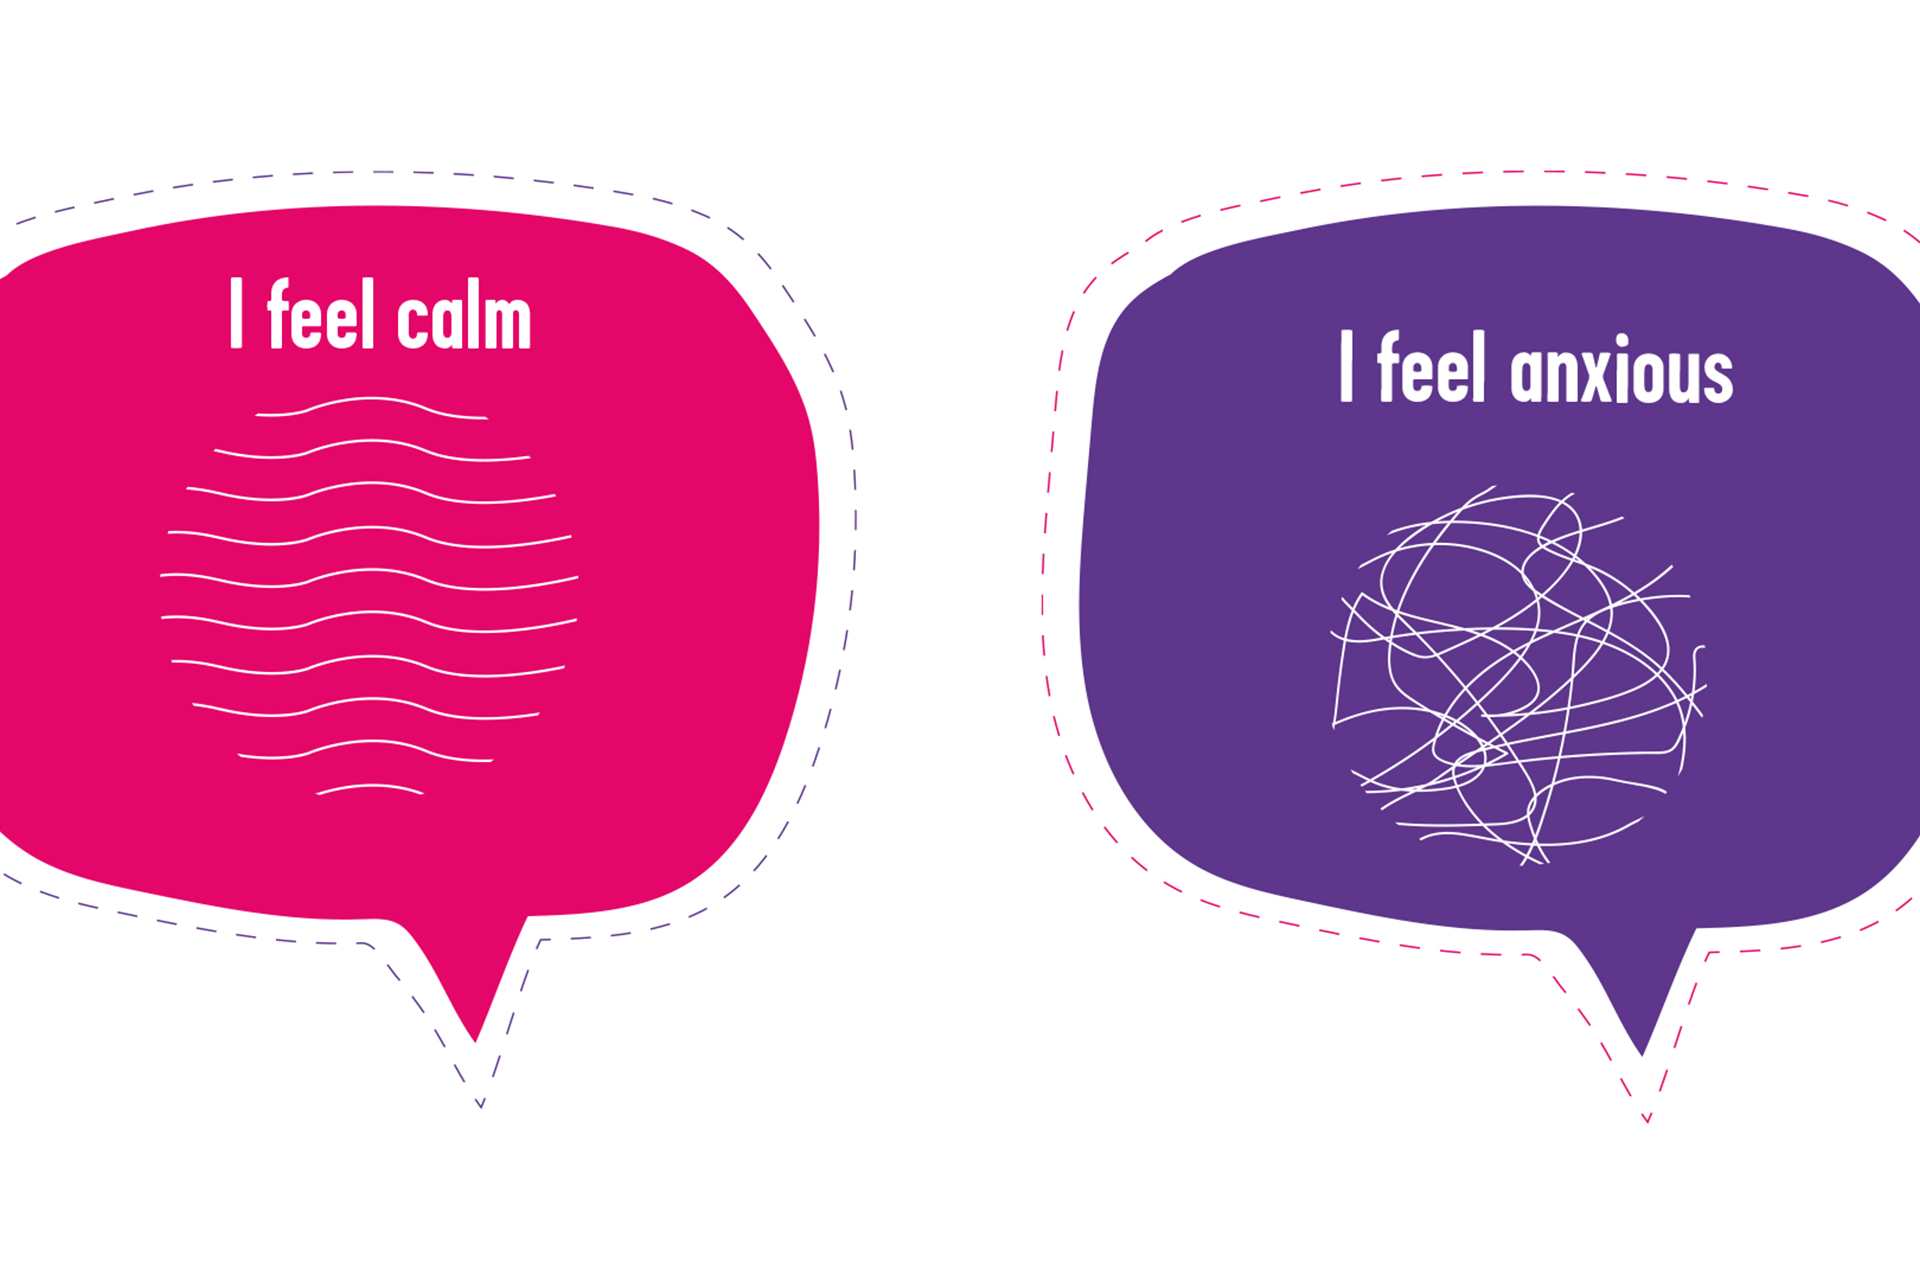 On the left is a pink speech bubble, at the top it says 'I feel calm' with wavy lines shaped into a circle underneath. On the right is a purple speech bubble, at the top it says 'I feel anxious' with lots of scribble lines shaped into a circle underneath.